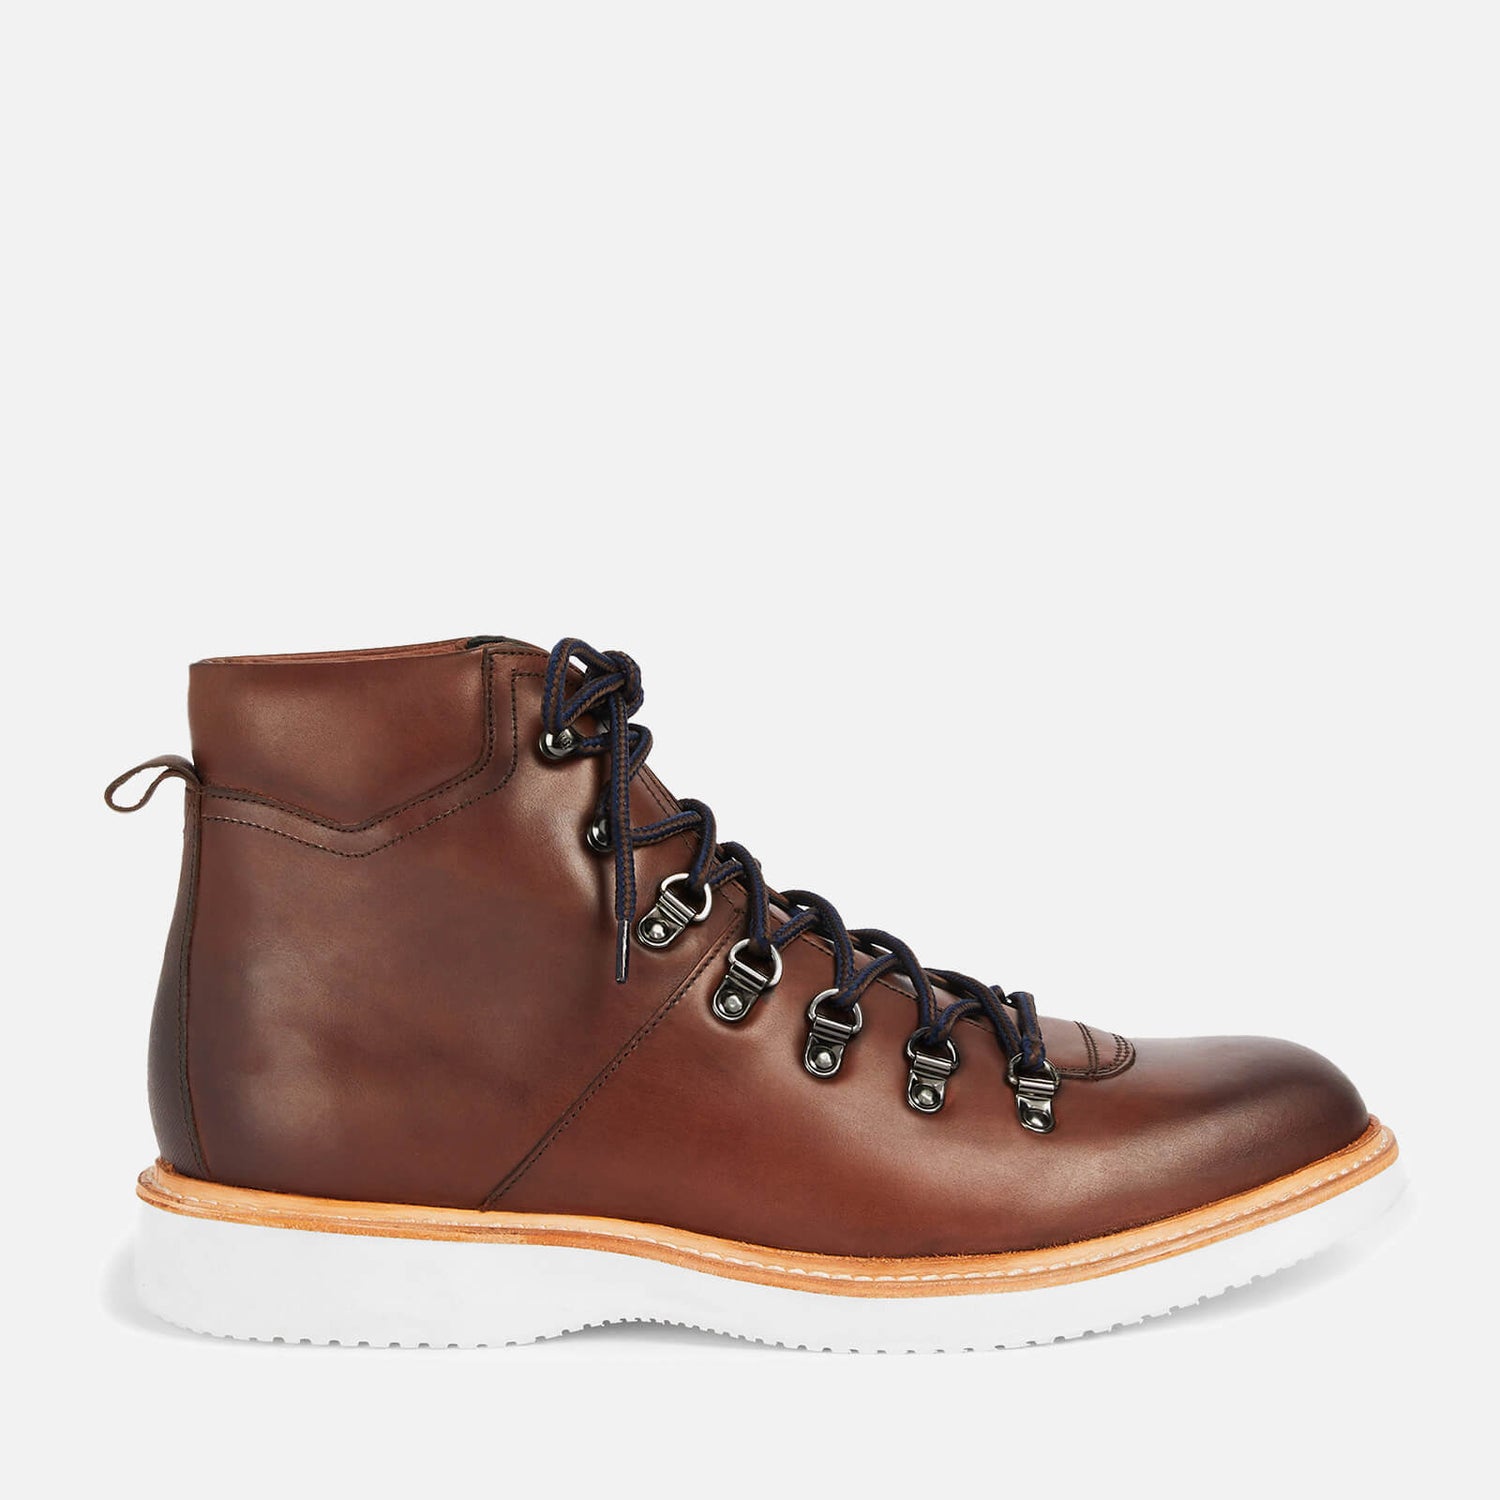 Ted Baker Men's Liykerr Leather Hiking Style Boots - Brown